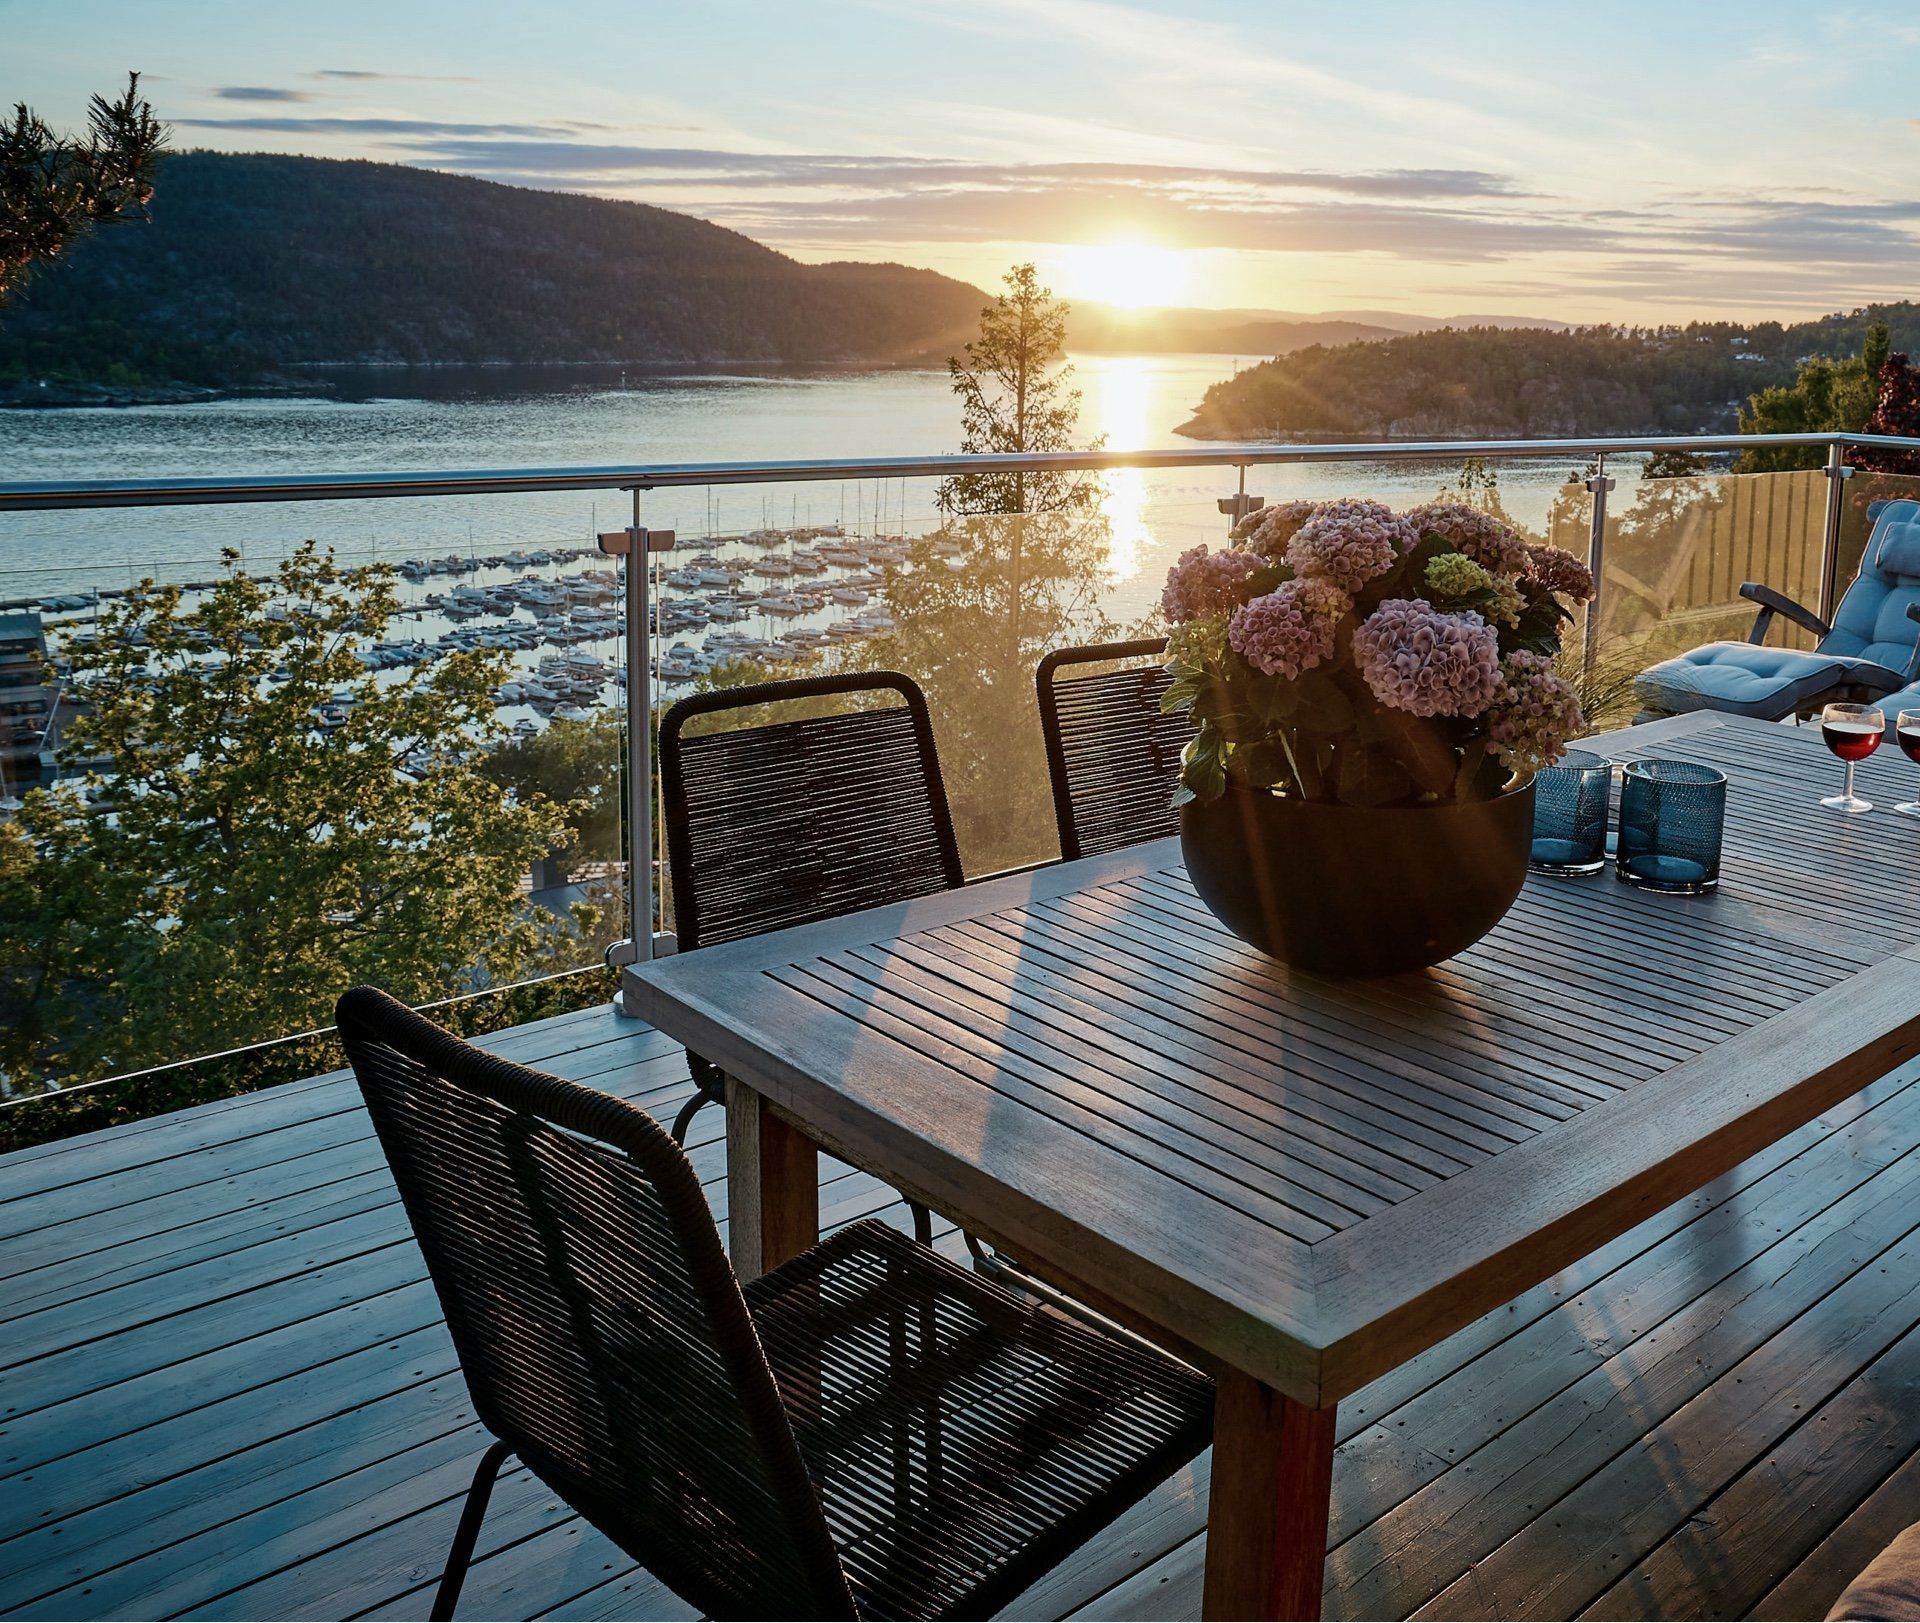 A table with a vase of flowers on it on a deck overlooking a body of water